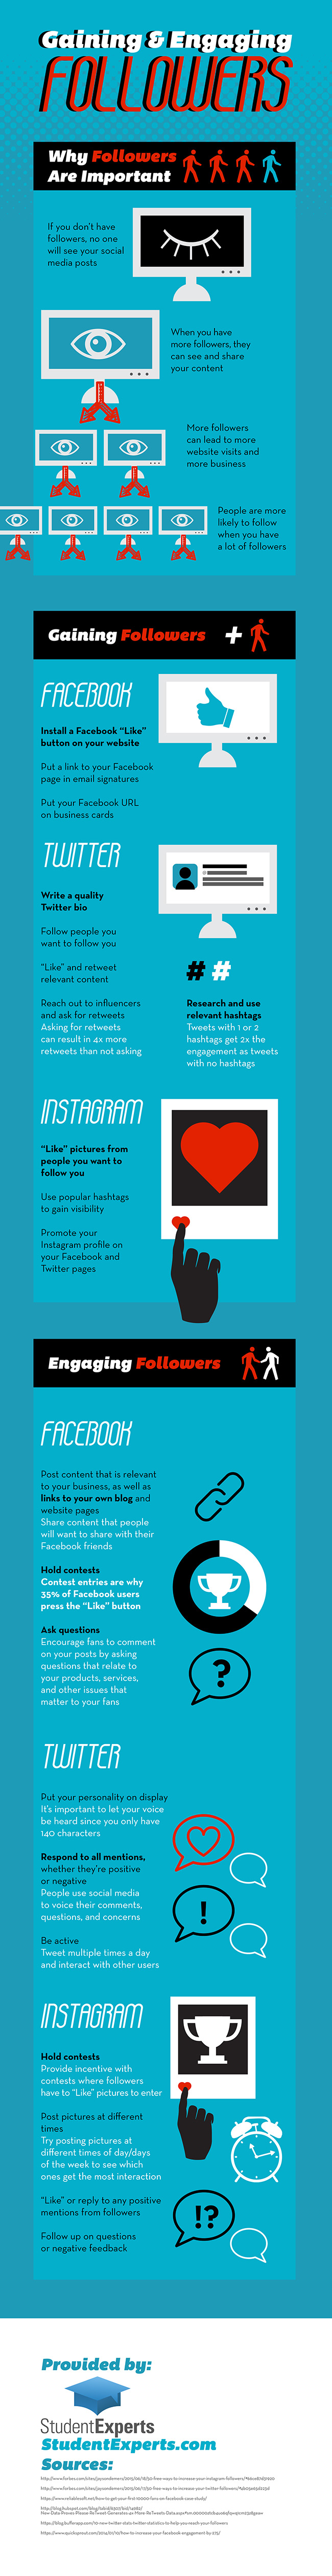 Gaining and Engaging Followers